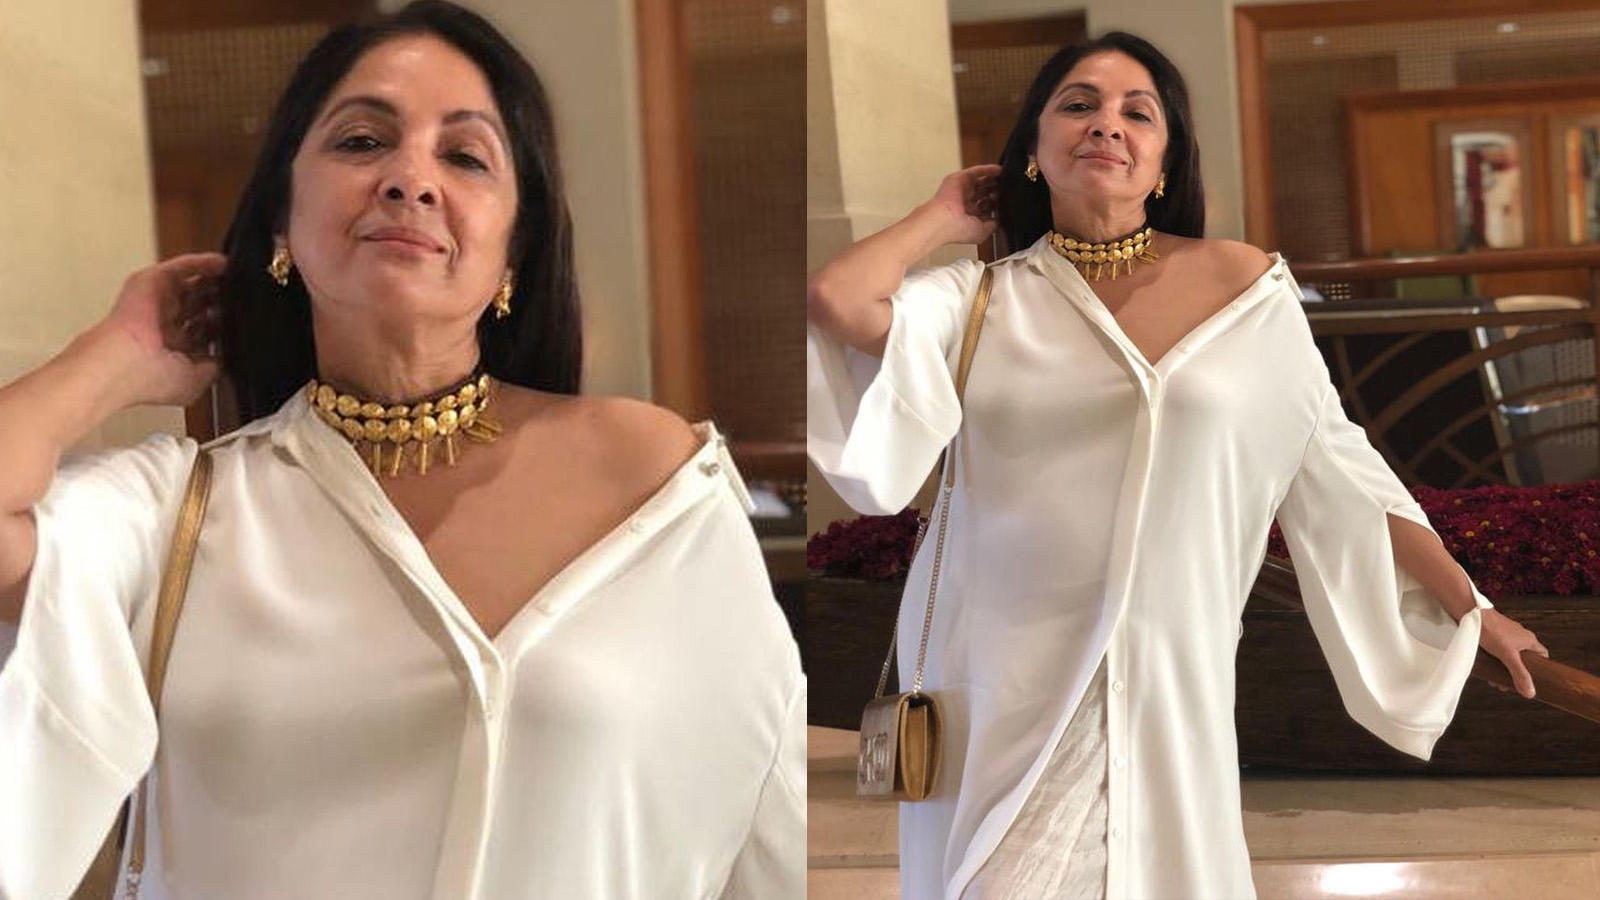 My Hot Pictures Get A Lot Of Likes Says Neena Gupta Hindi Movie News Bollywood Times Of India